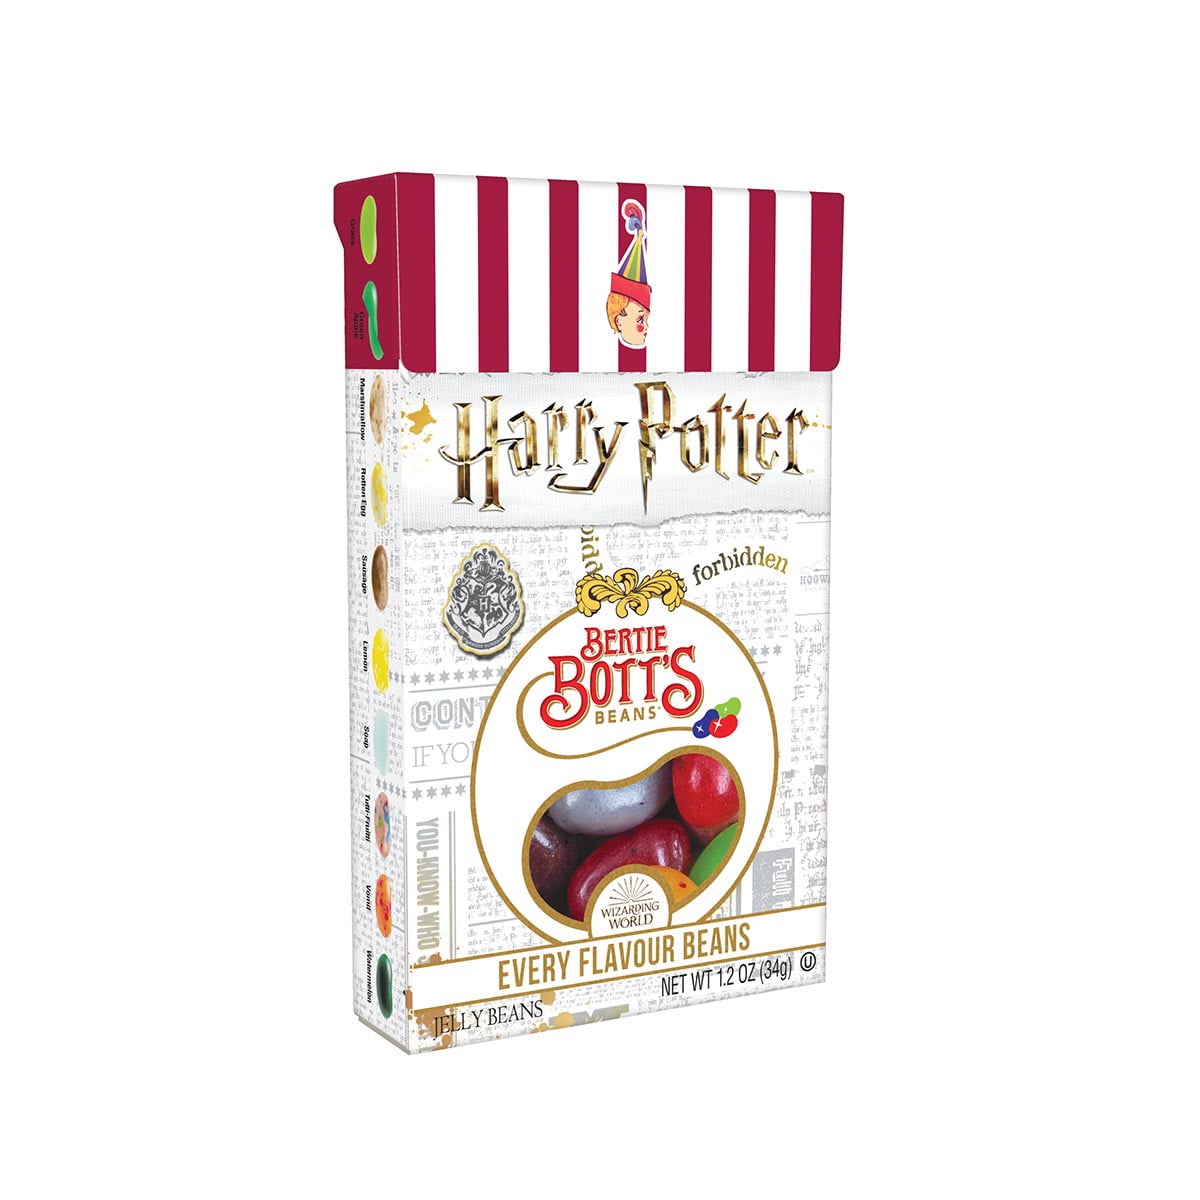 Bertie Bott's every flavor jelly beans from Harry Potter.